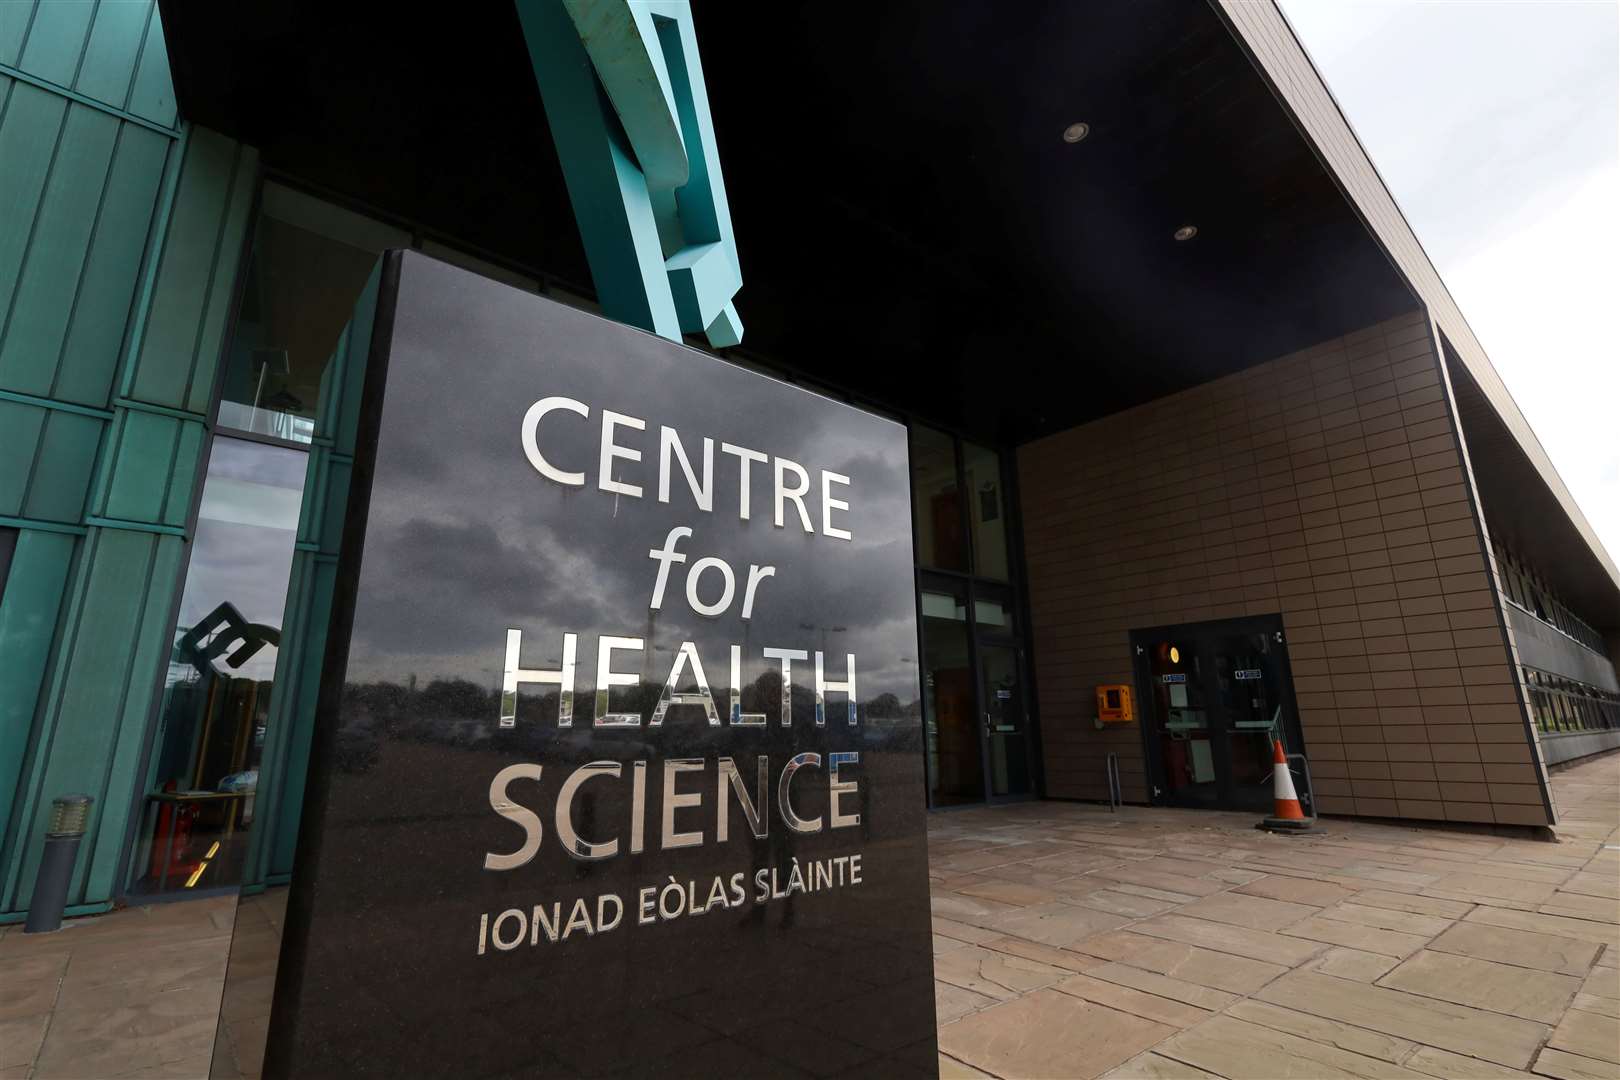 Centre for Health Science in Inverness.